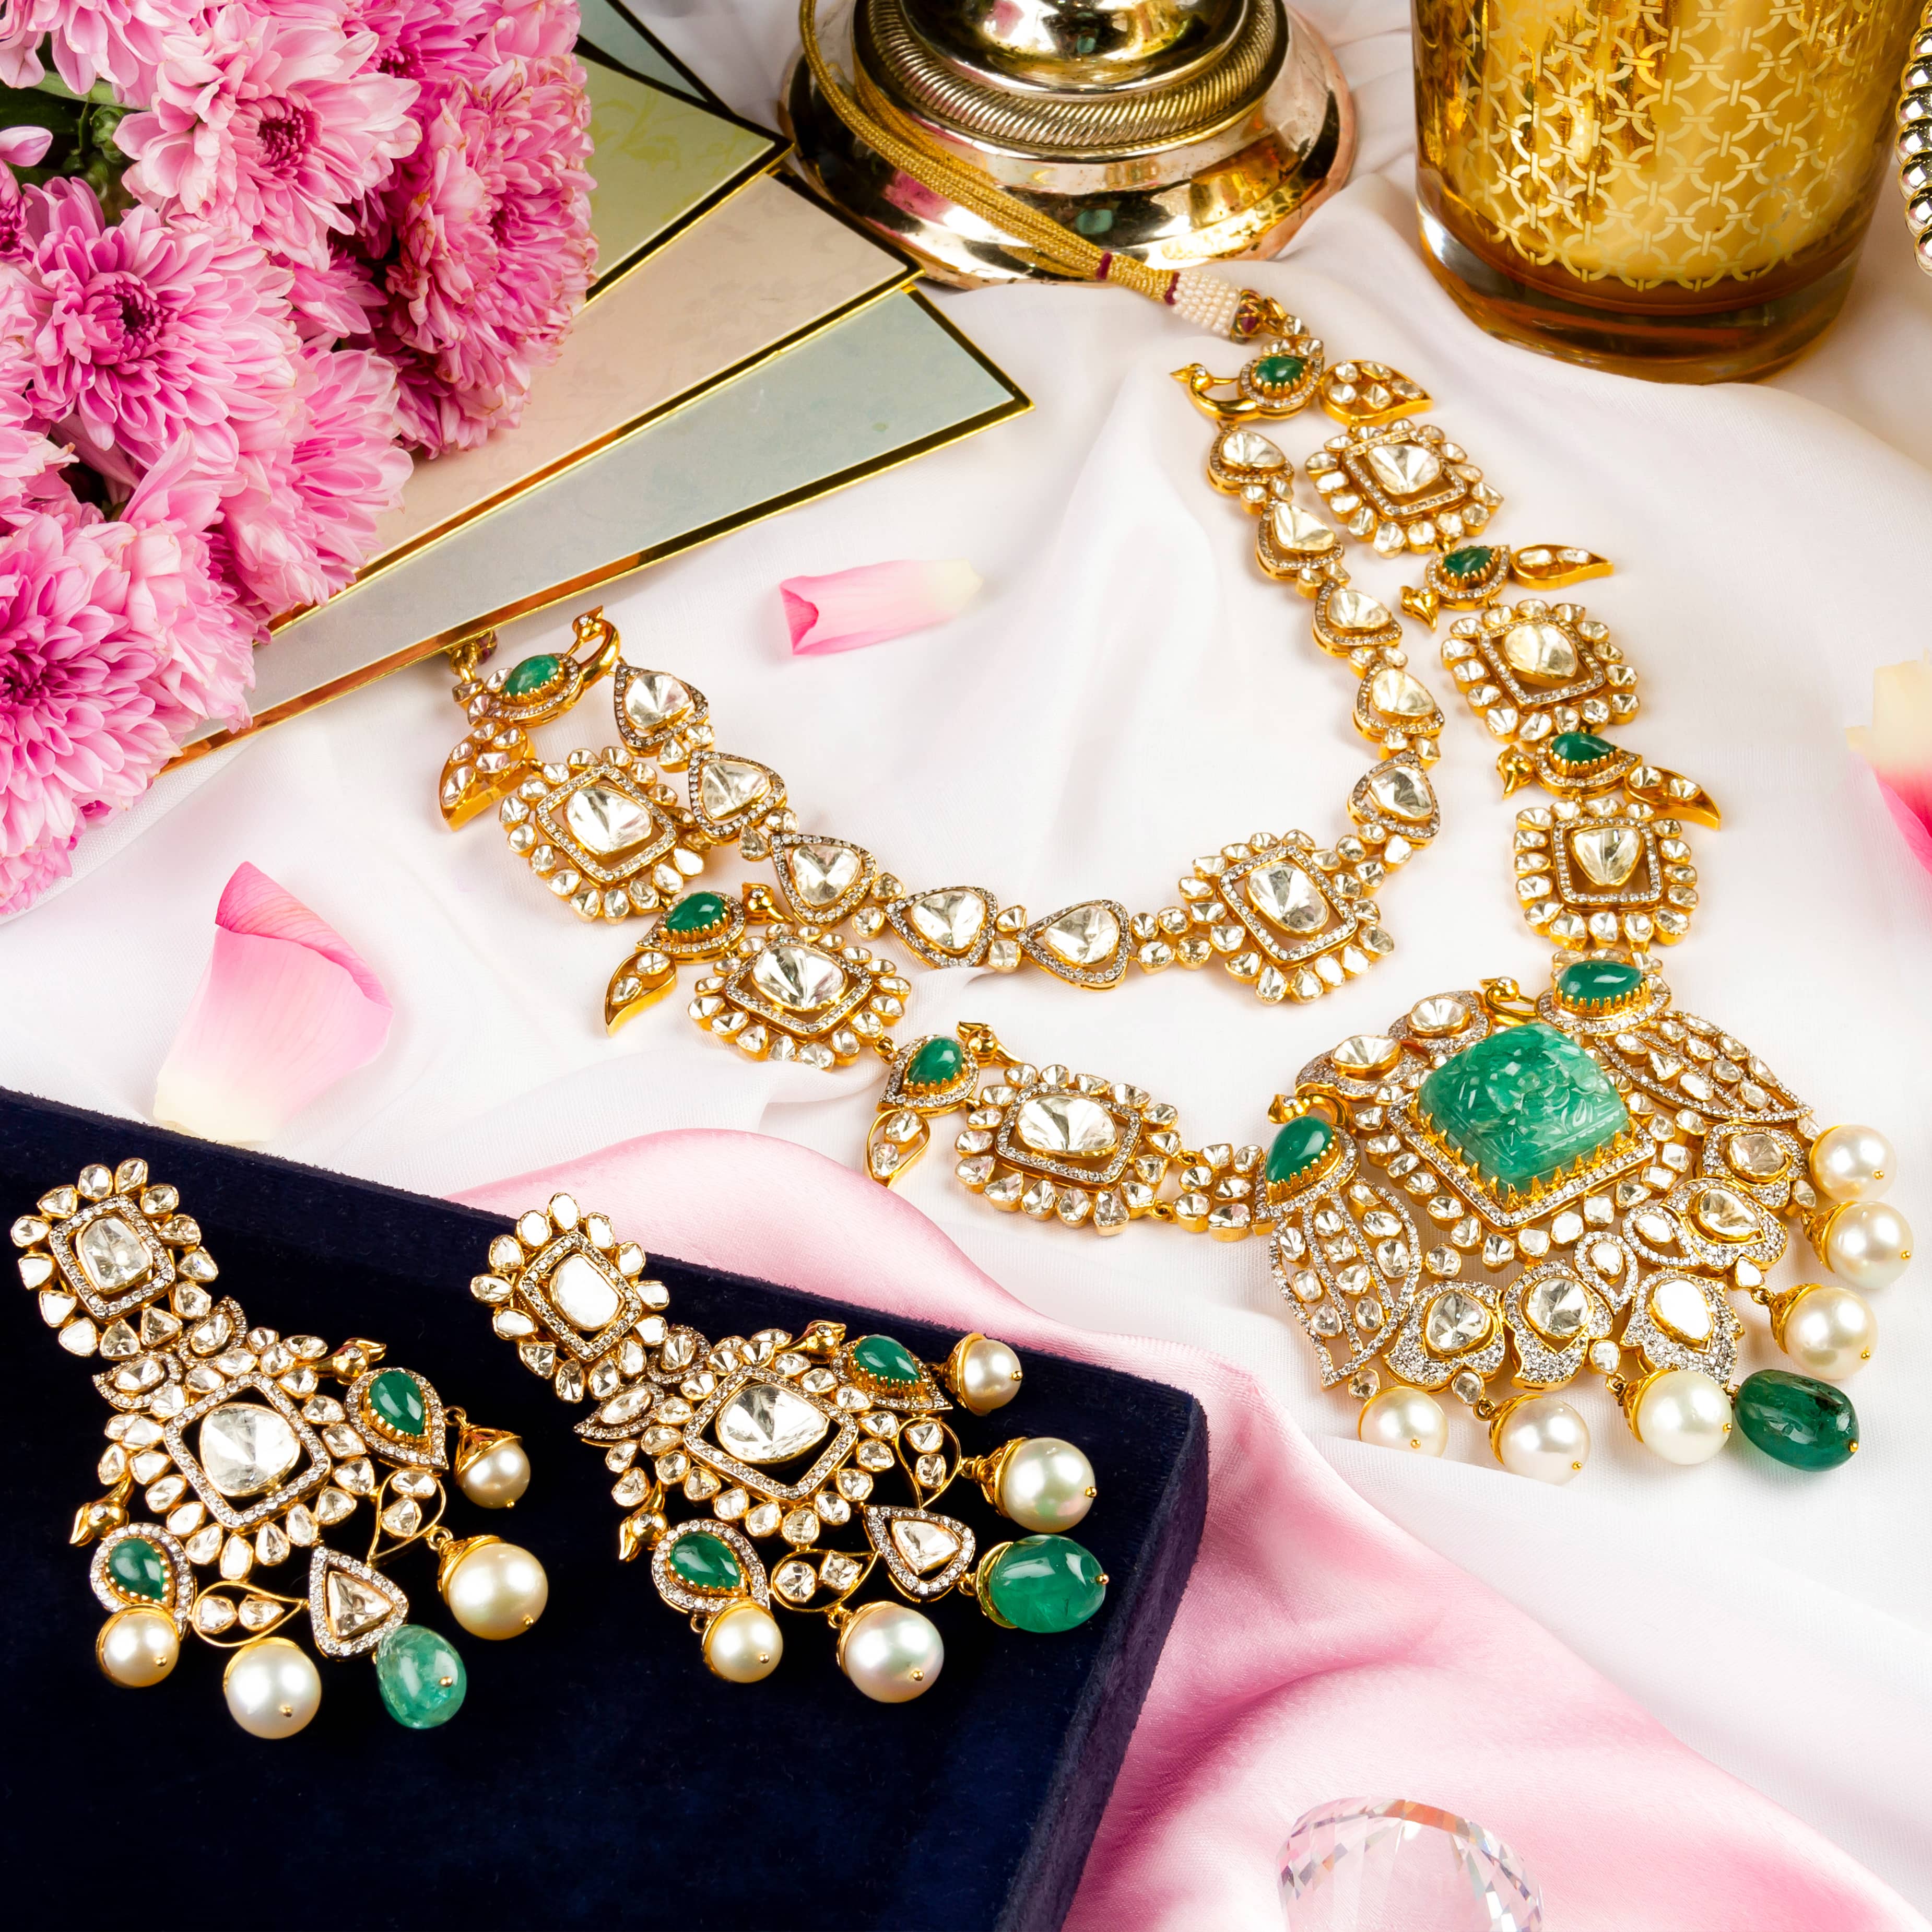 10 Red Dot Jewels Sale Jewellery Sets Under £500 You Need to Buy Now ::  Khush Mag